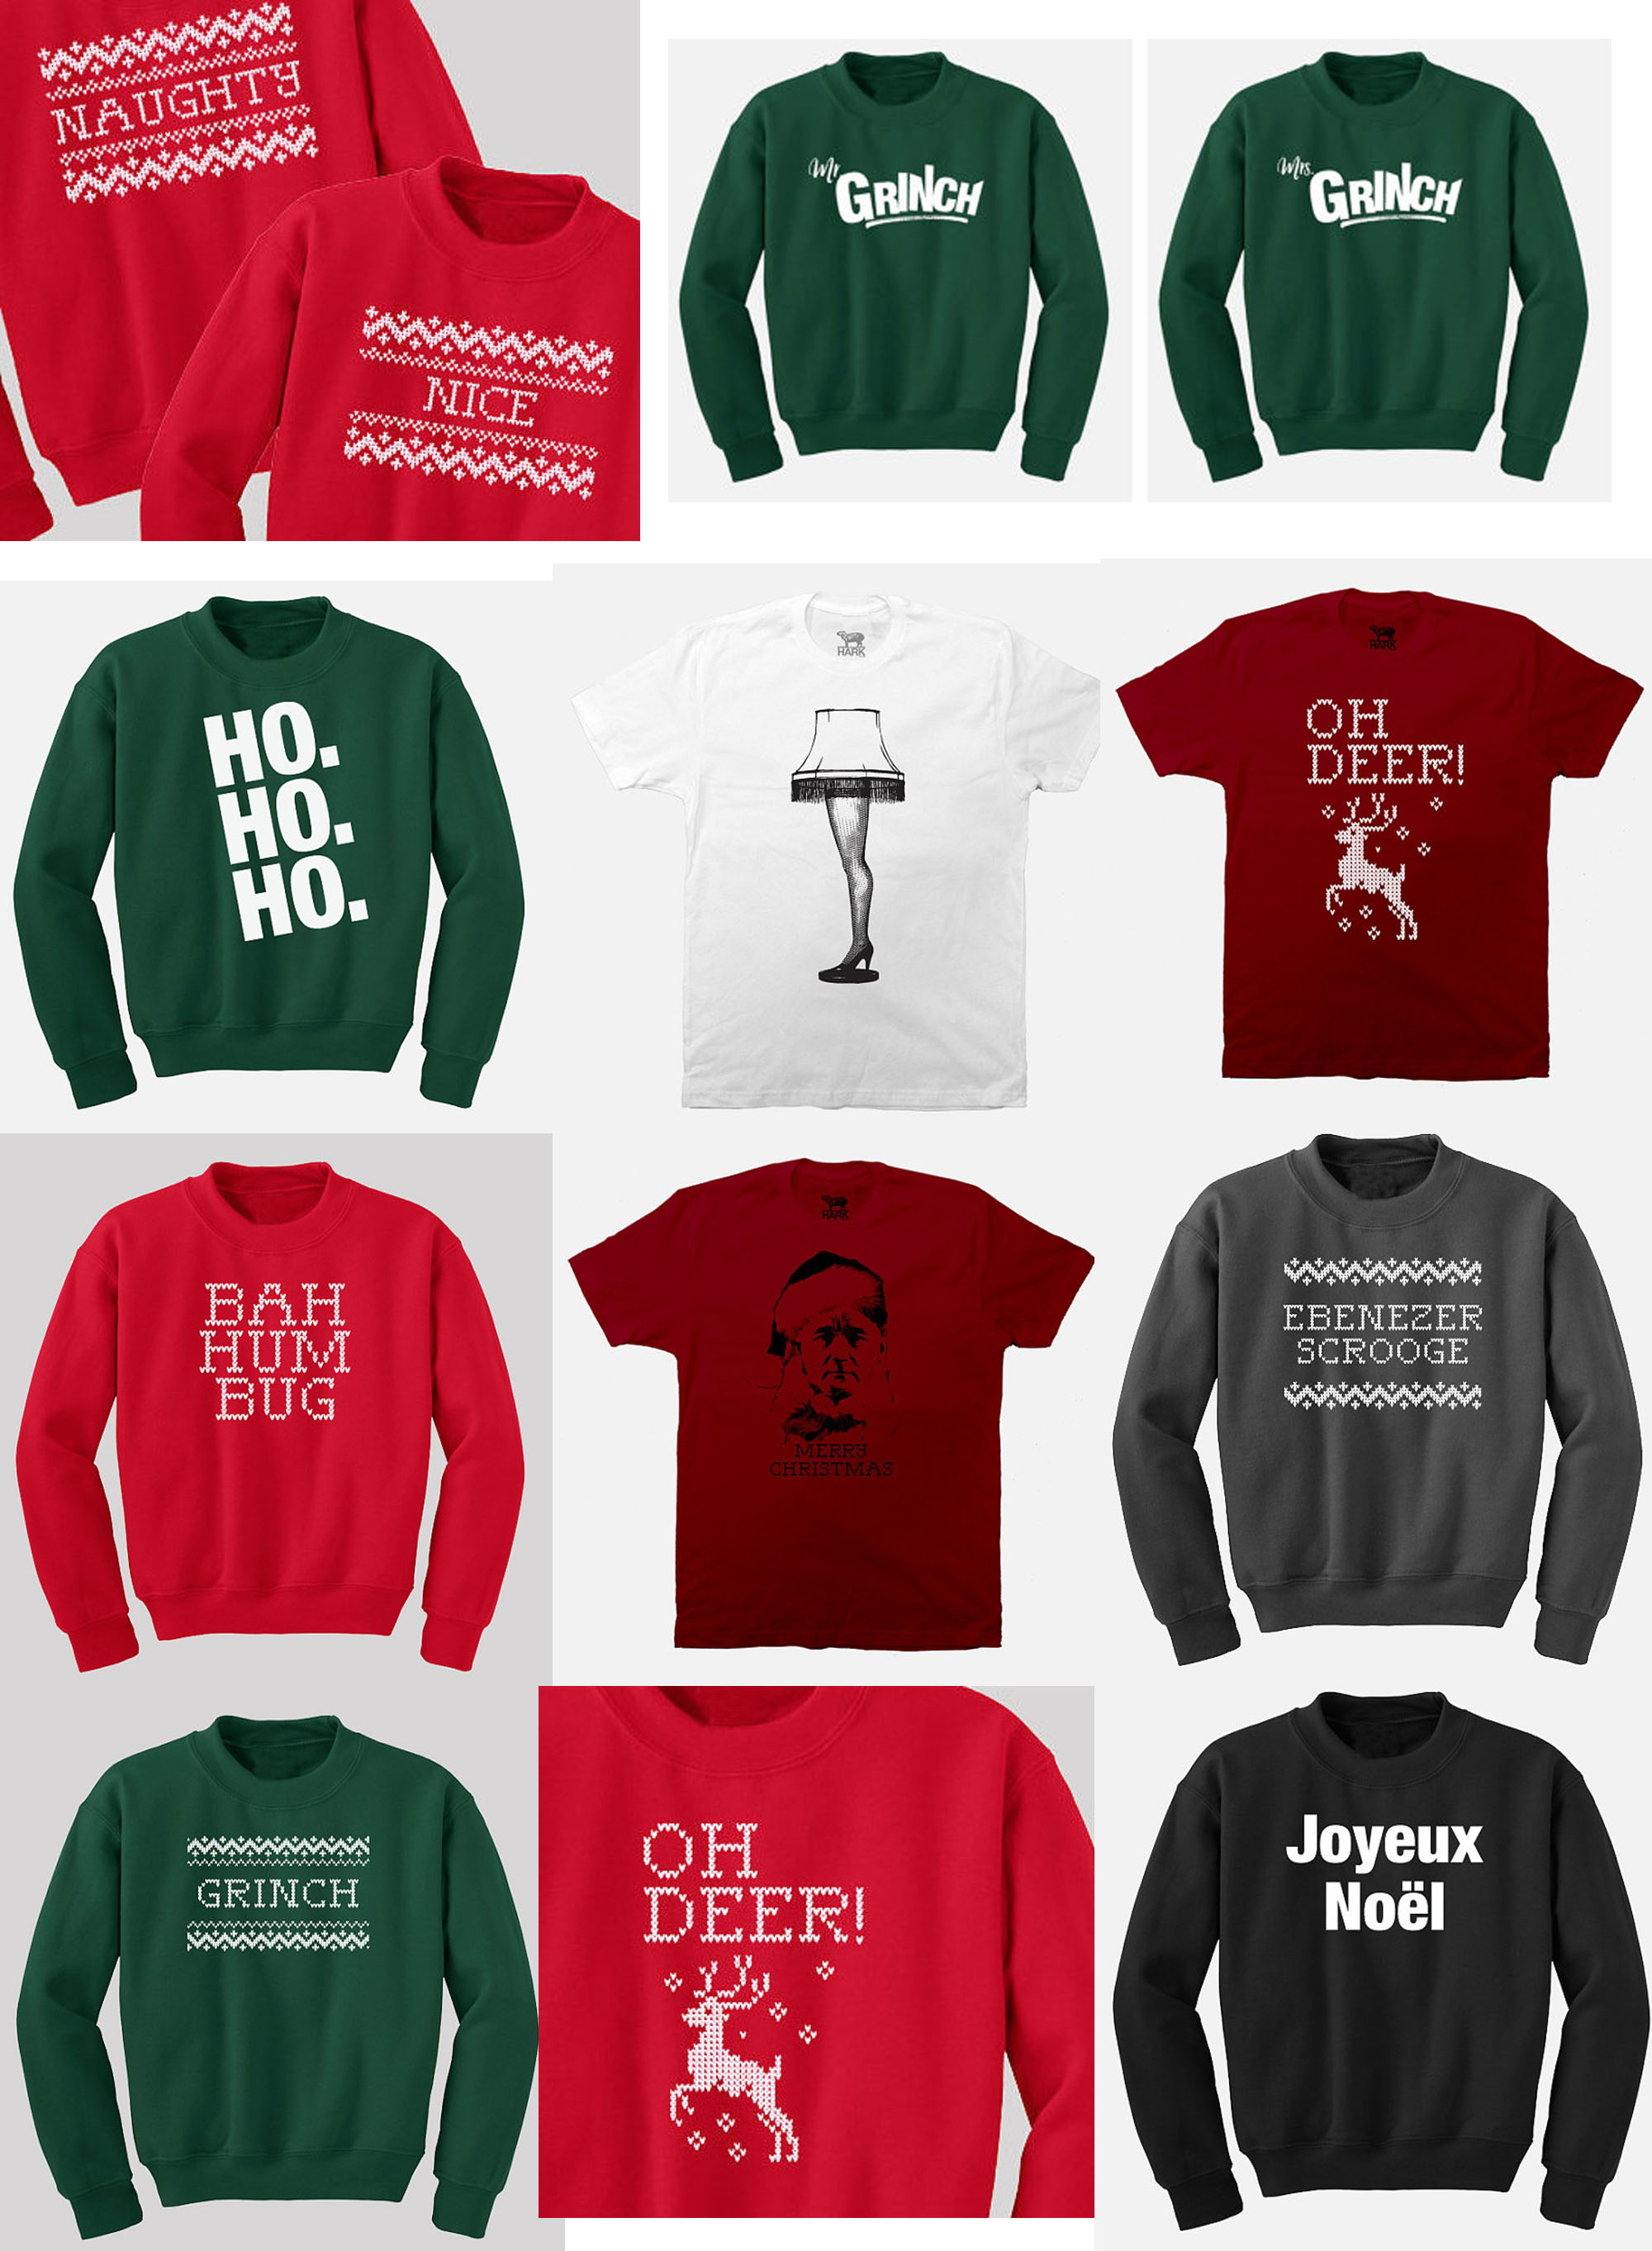 You'll Actually Want to Wear These Christmas Shirts - Factio ...